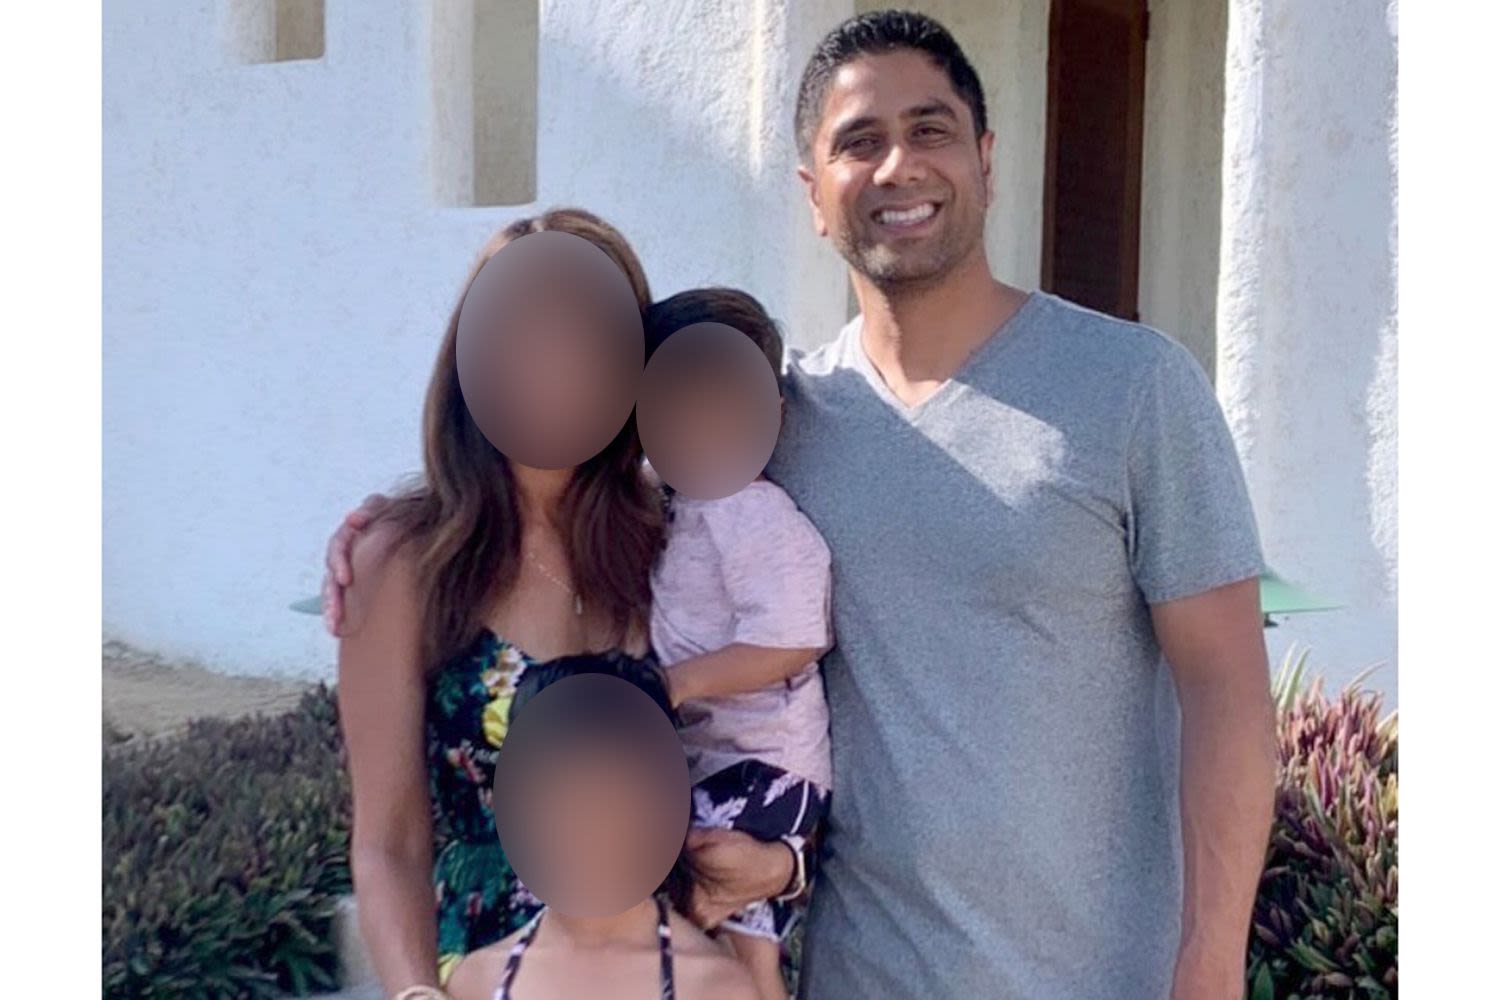 Why Wife of Doctor Who Drove Tesla Off Cliff Thinks His Return Home Will 'Restore Our Family'